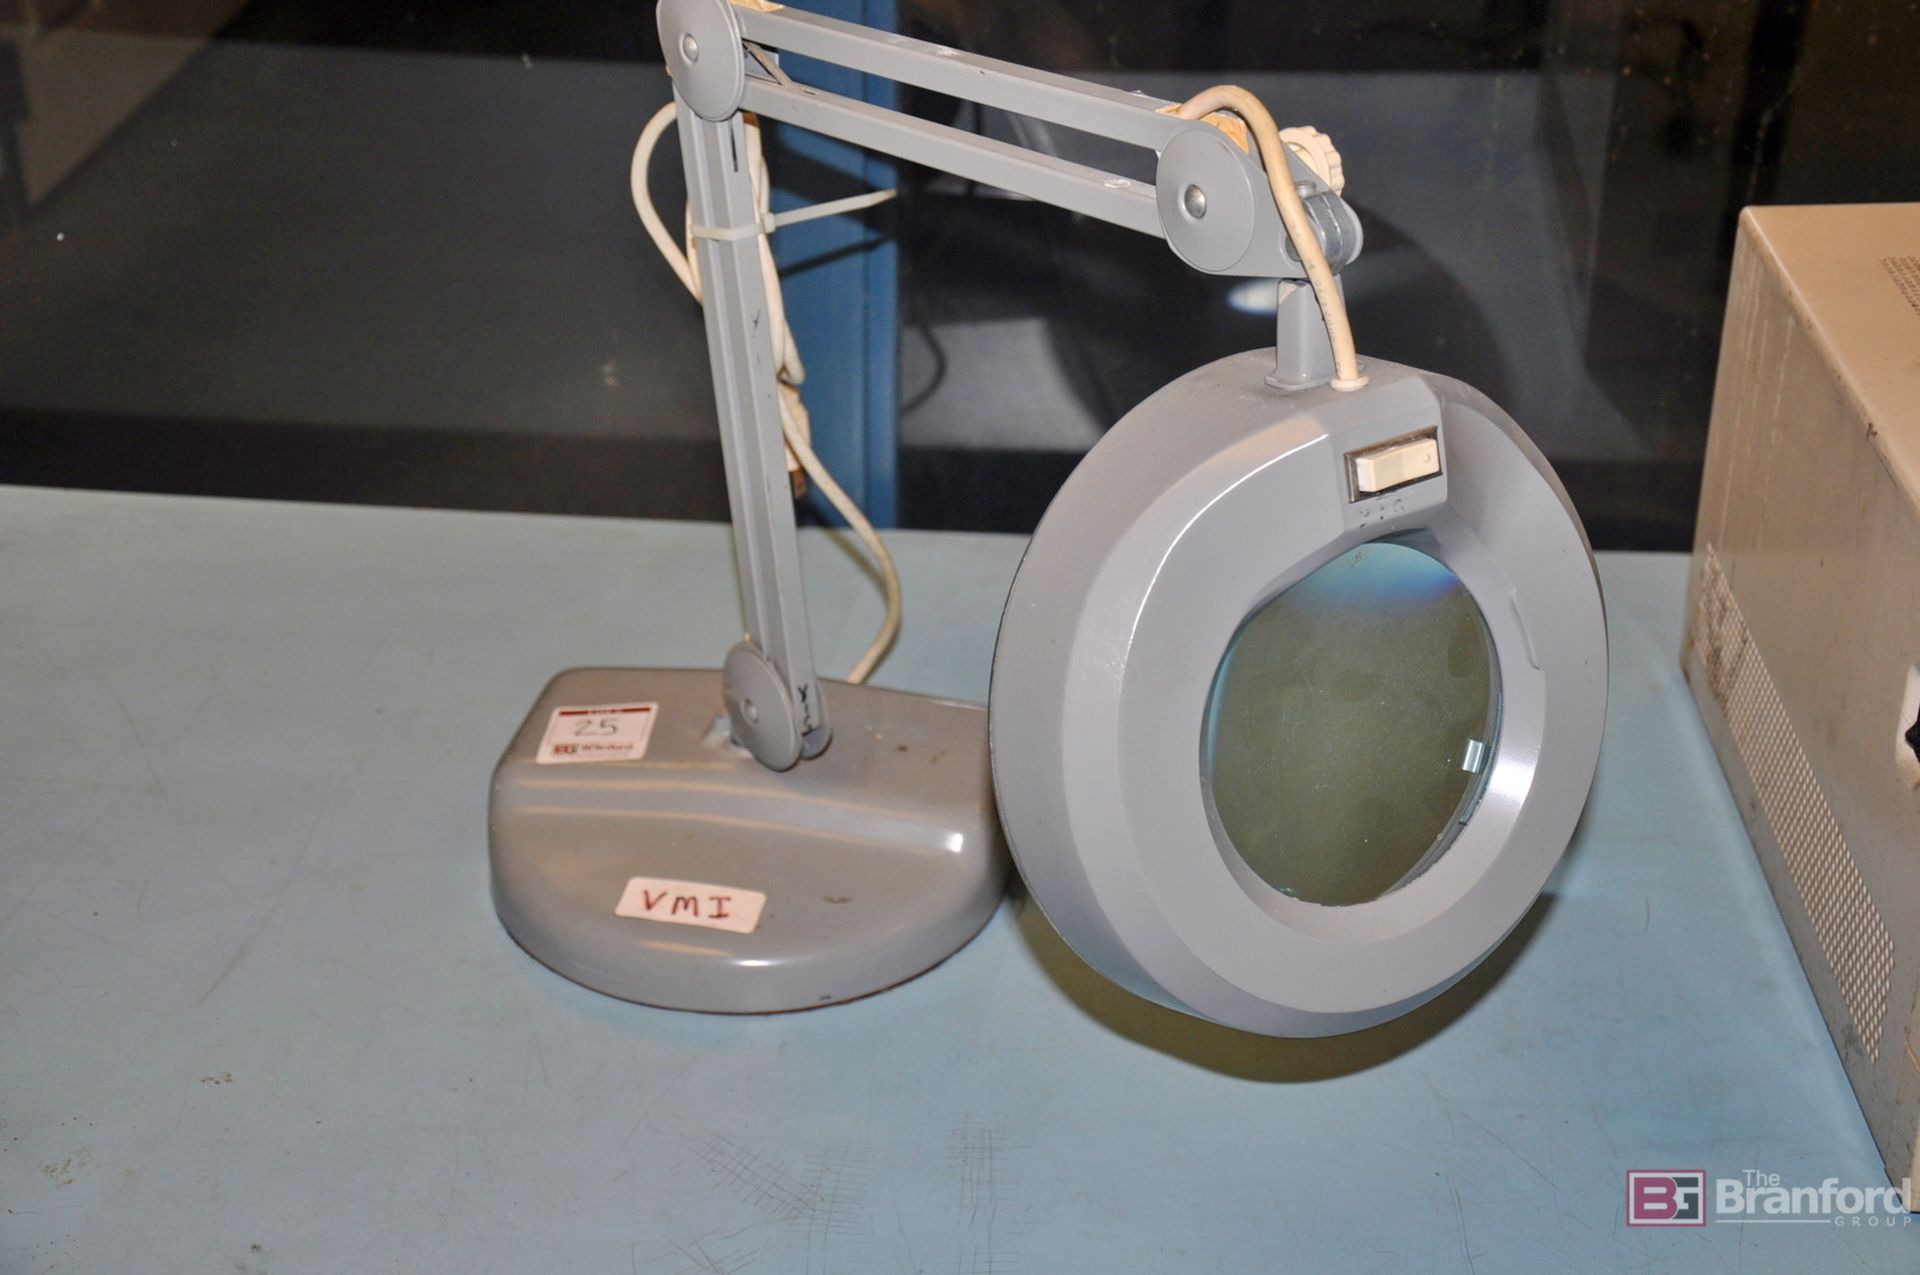 Inspection lamp, Luxo magnifier - Image 2 of 2